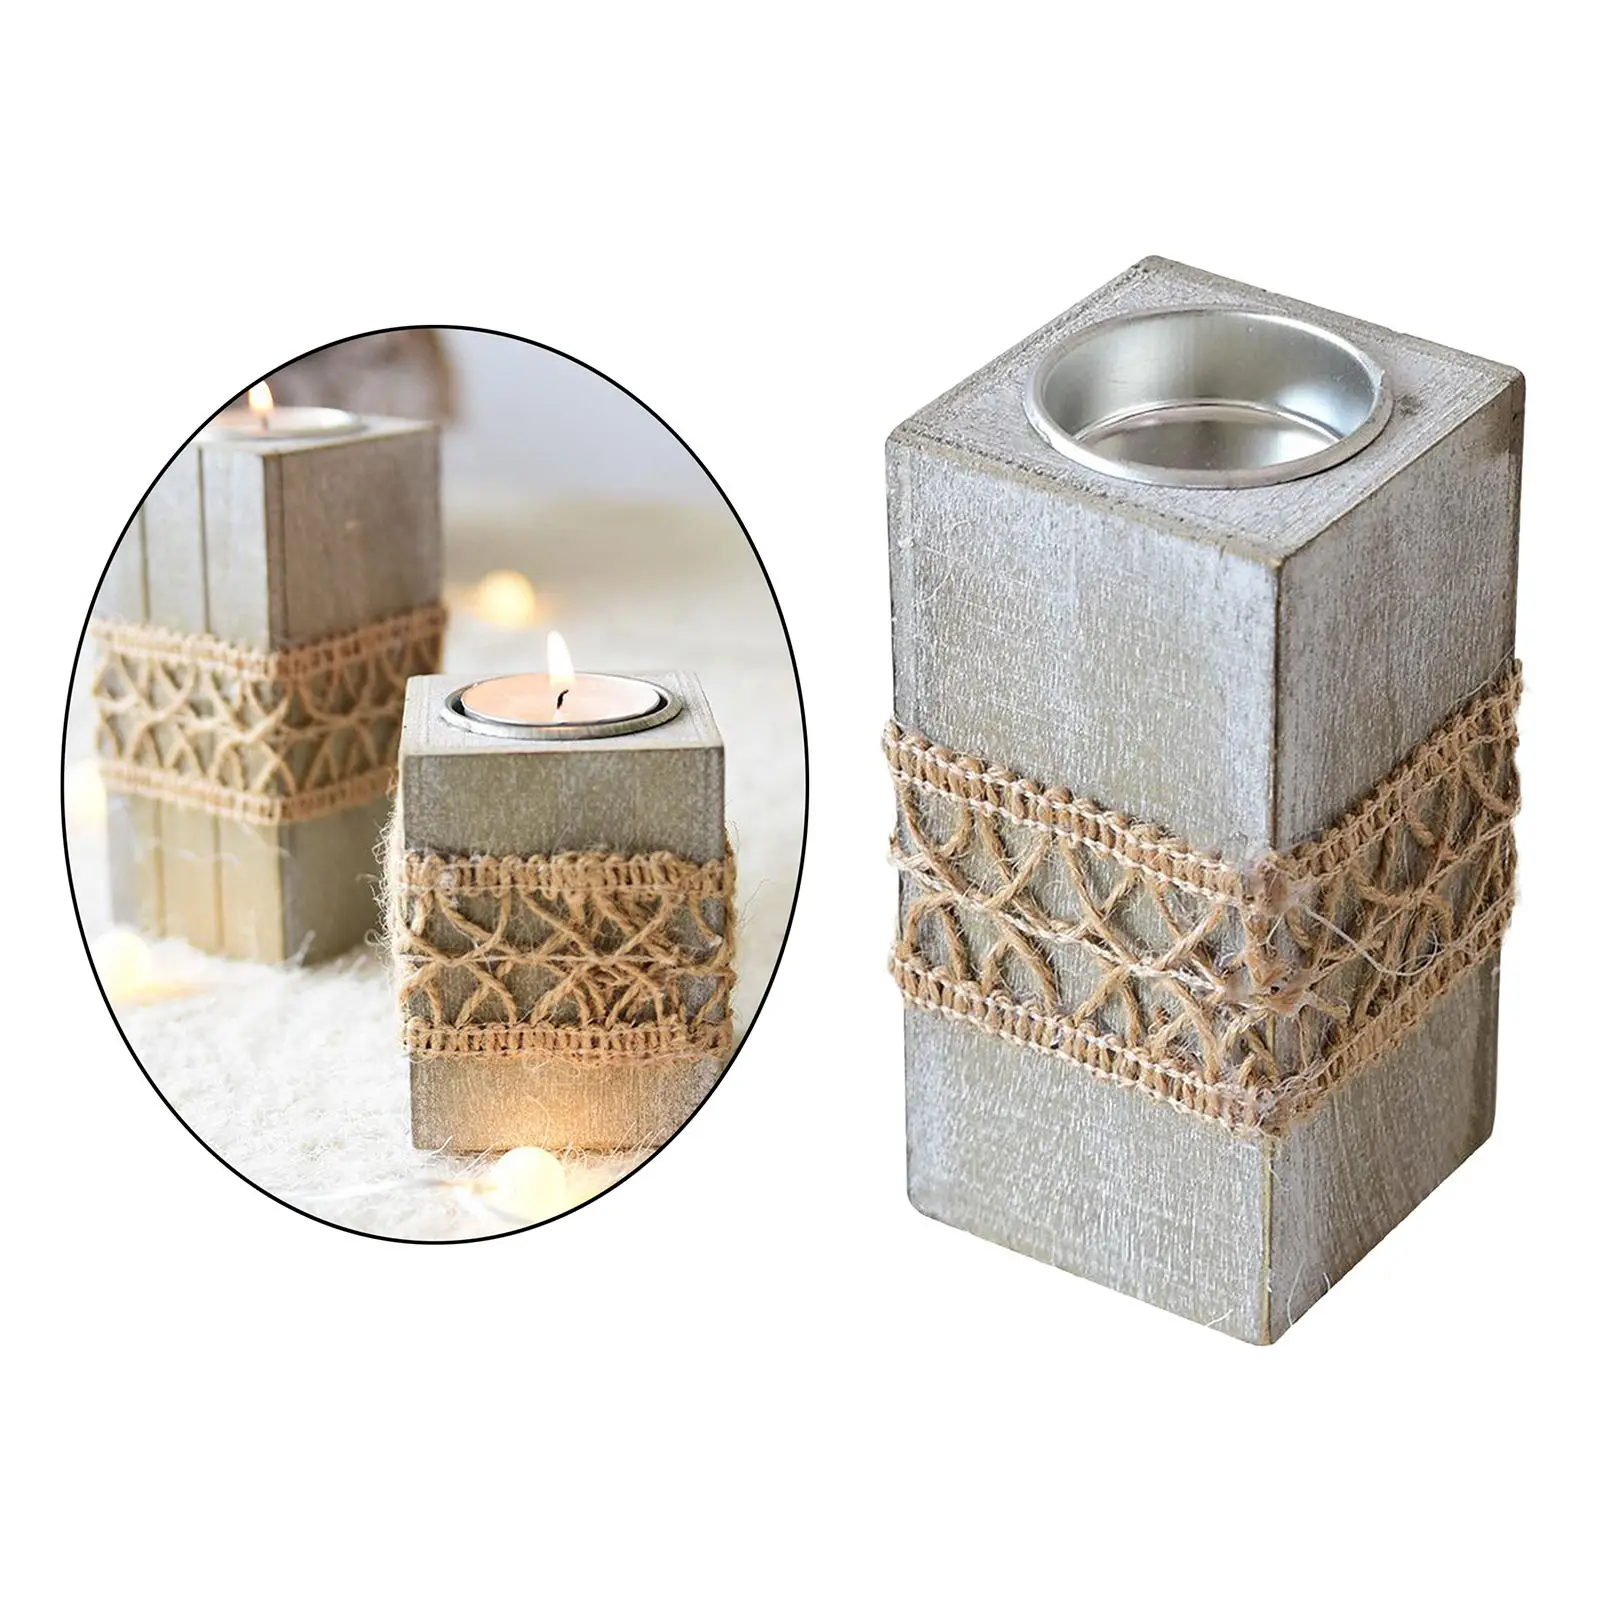 Rustic Vintage Wooden Tea light Candle Holder Chic Coffee Table Centerpieces Decor Candle Stand for Living Dining Room Table